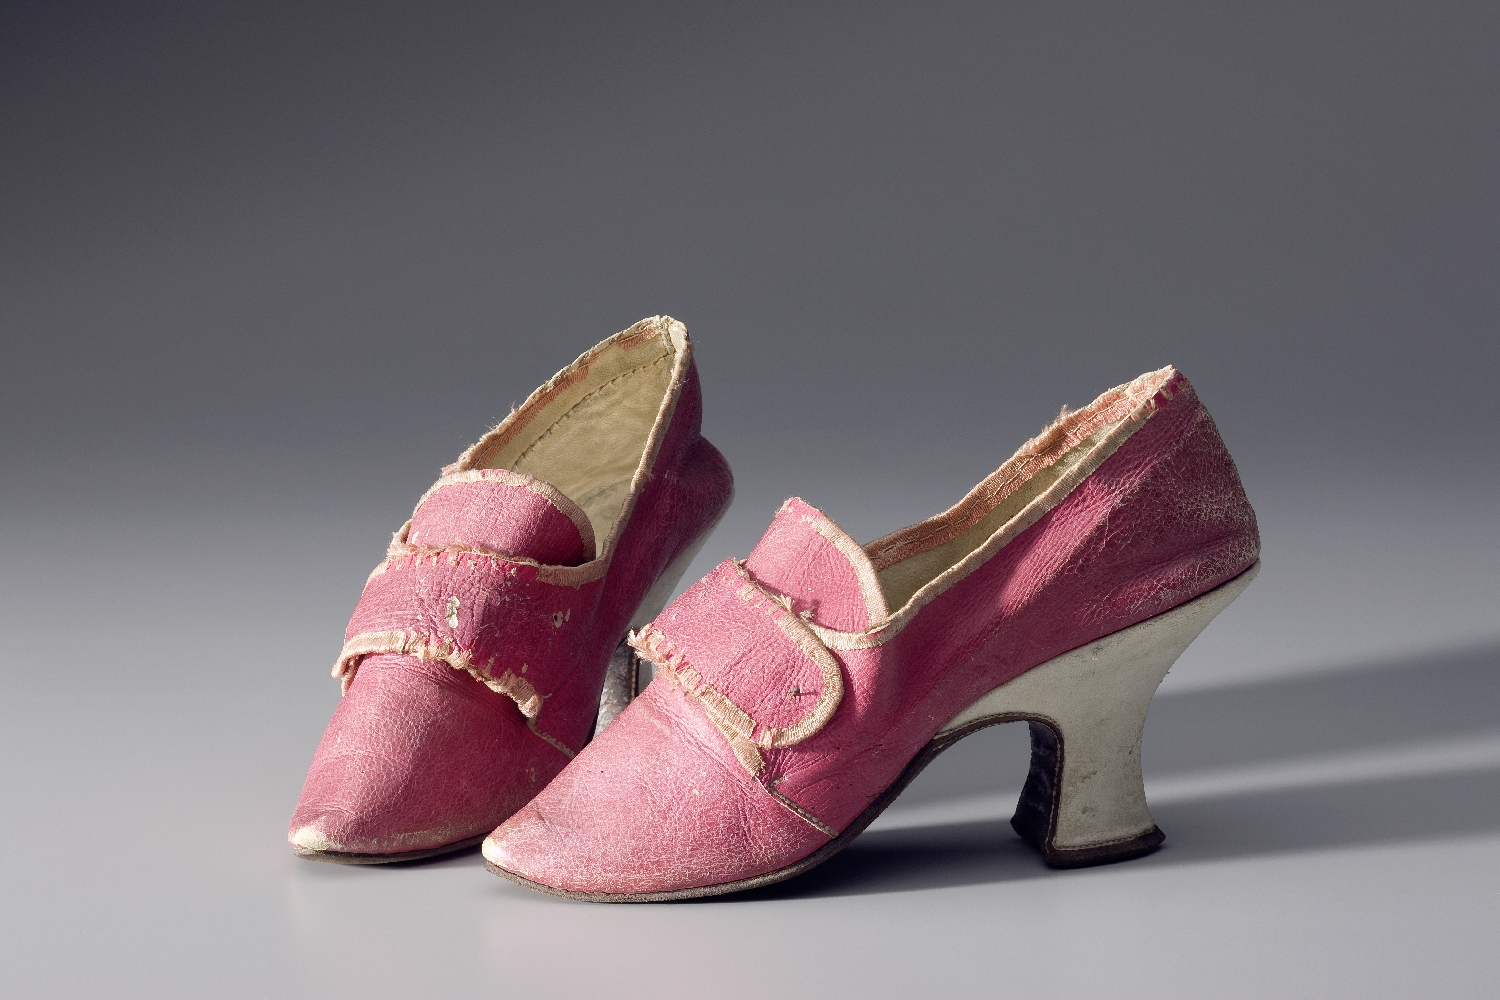 Lady’s shoes, late 17th/early 18th c., leather, silk, inv. no. K 1715-49